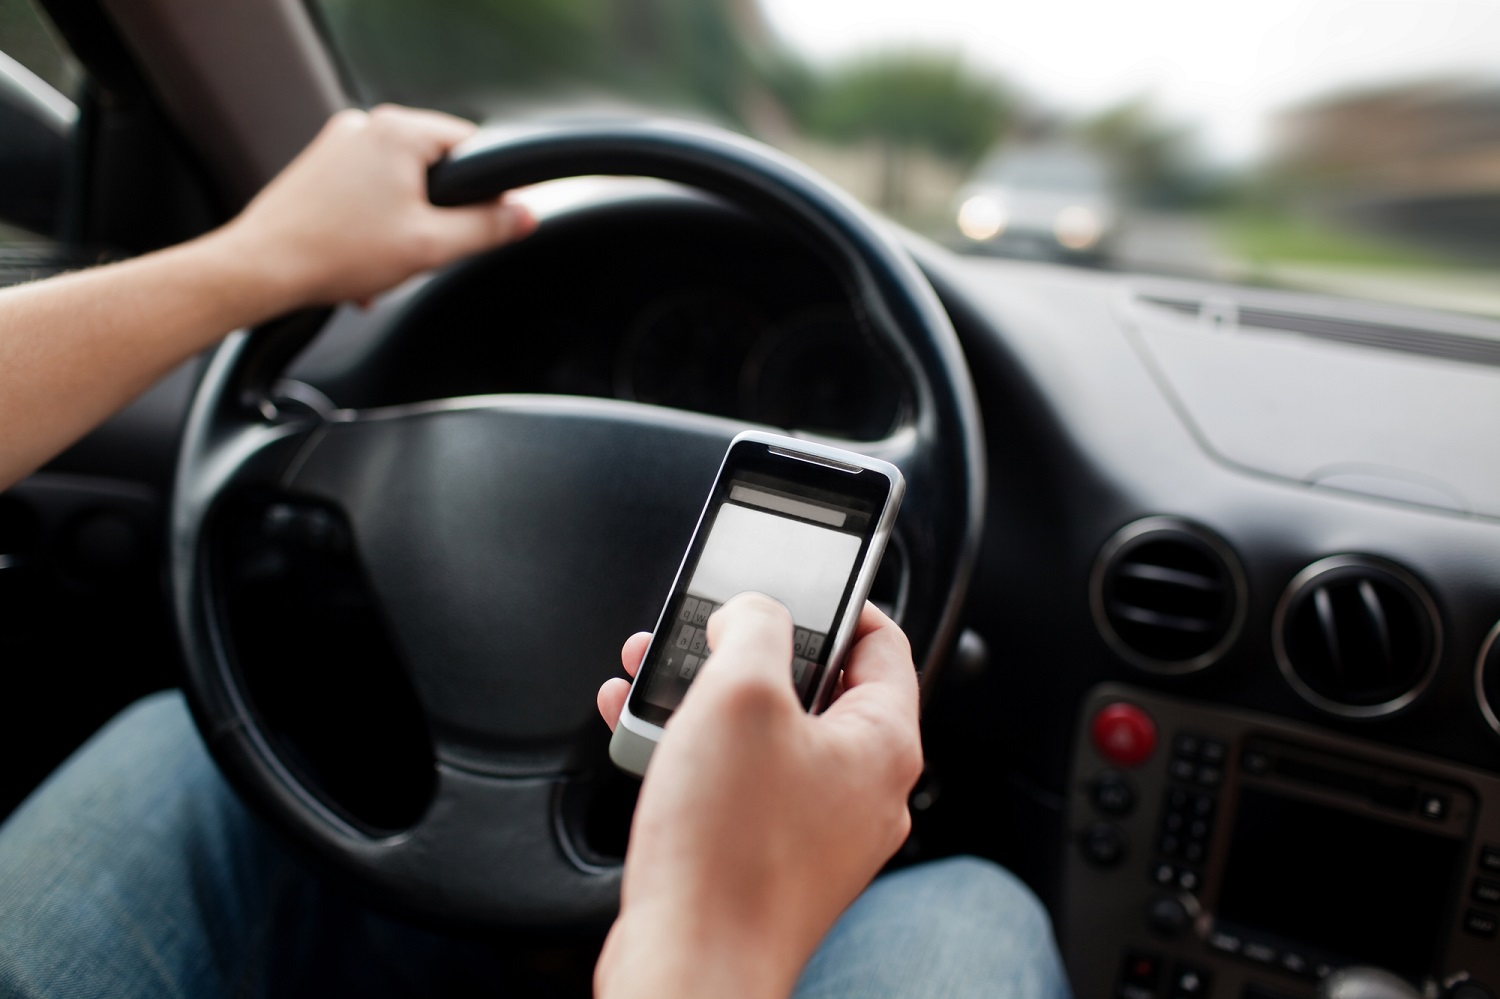 Distracted Driver on Cellphone Hit Me. What are my Rights